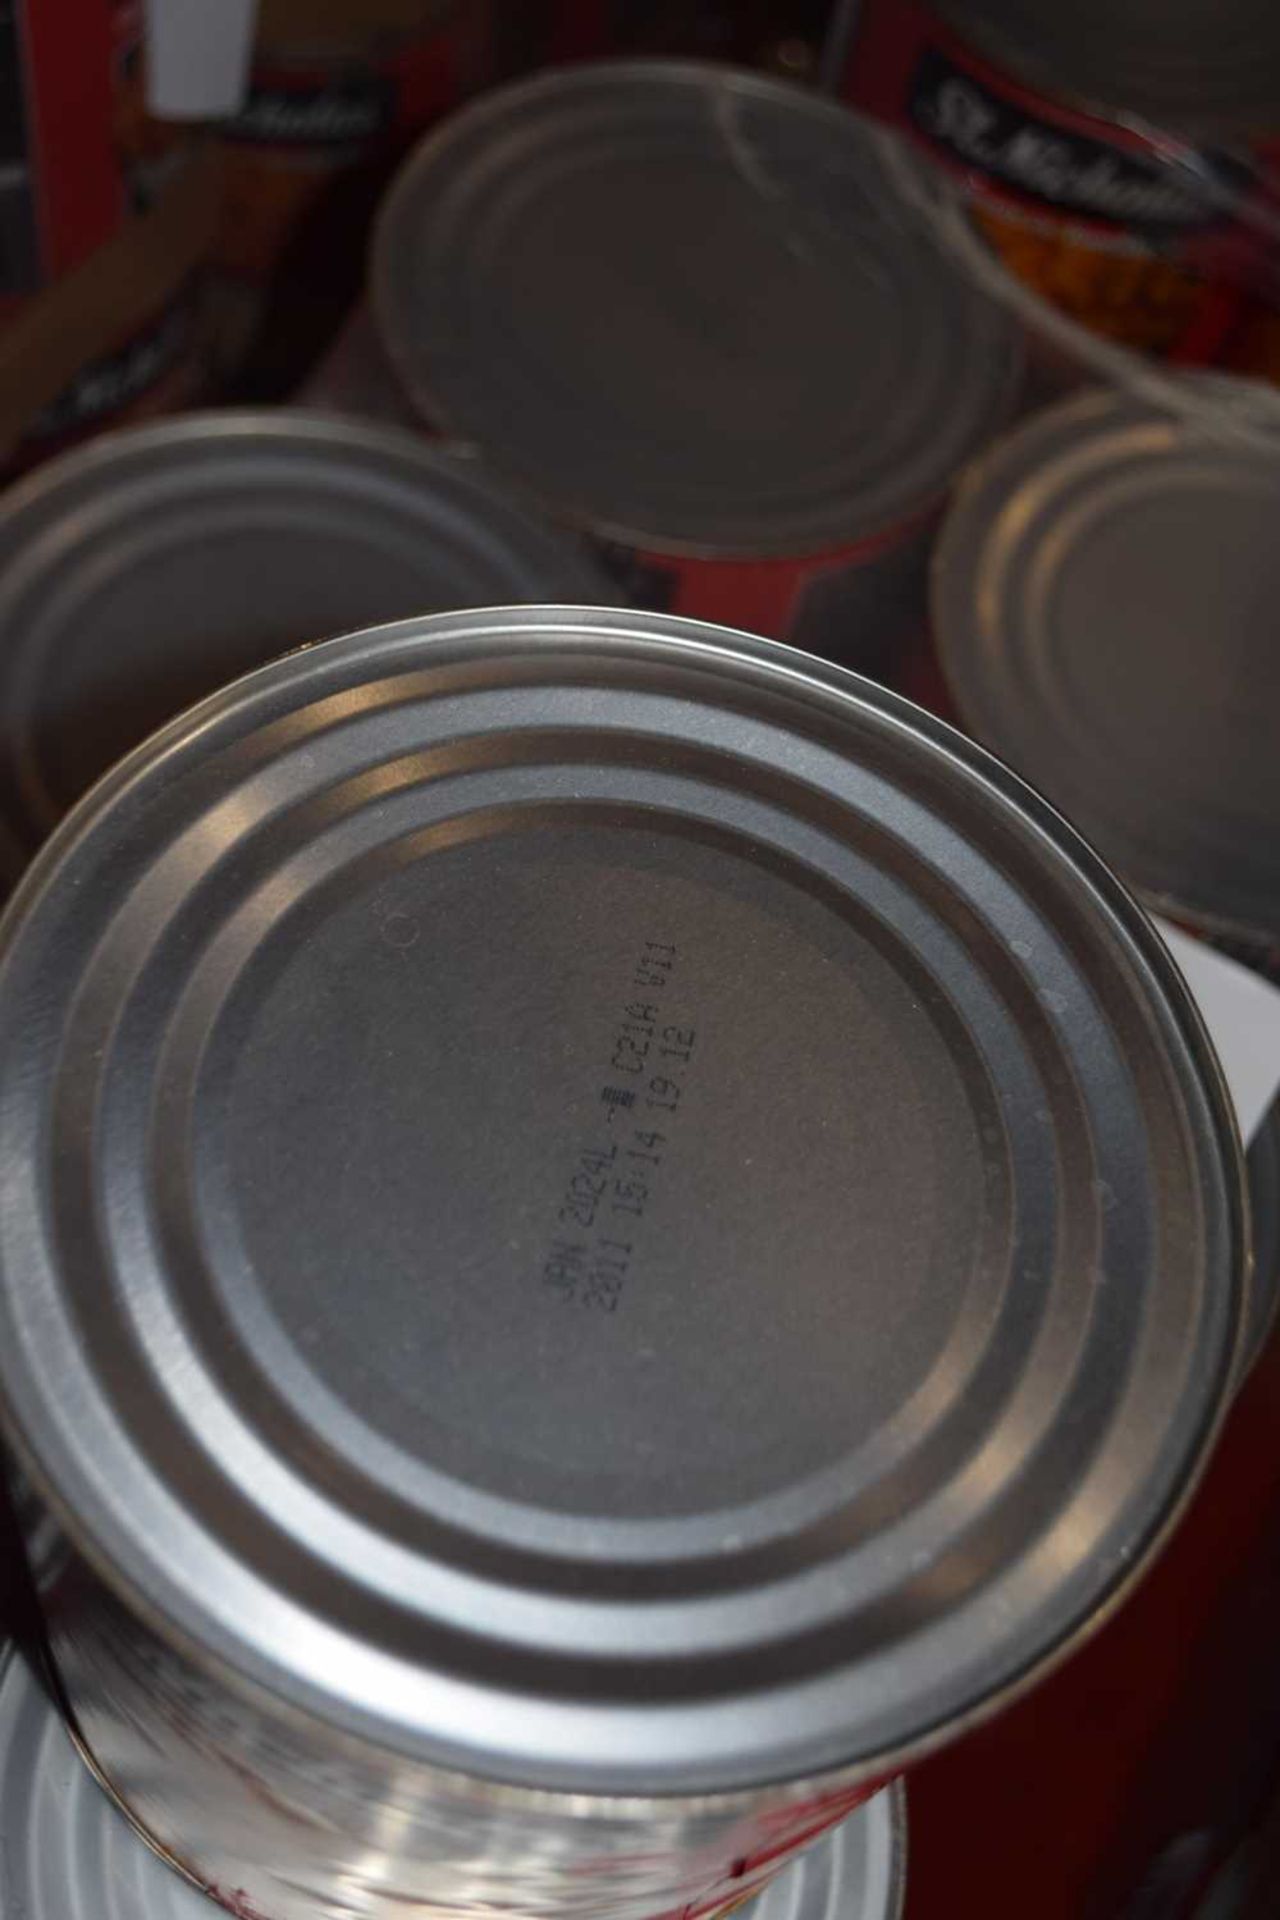 Six packs of St Nicholas Baked Beans in Tomato Sauce, 6x2.6kg tins per pack. Best Before Date: Jan - Image 3 of 3